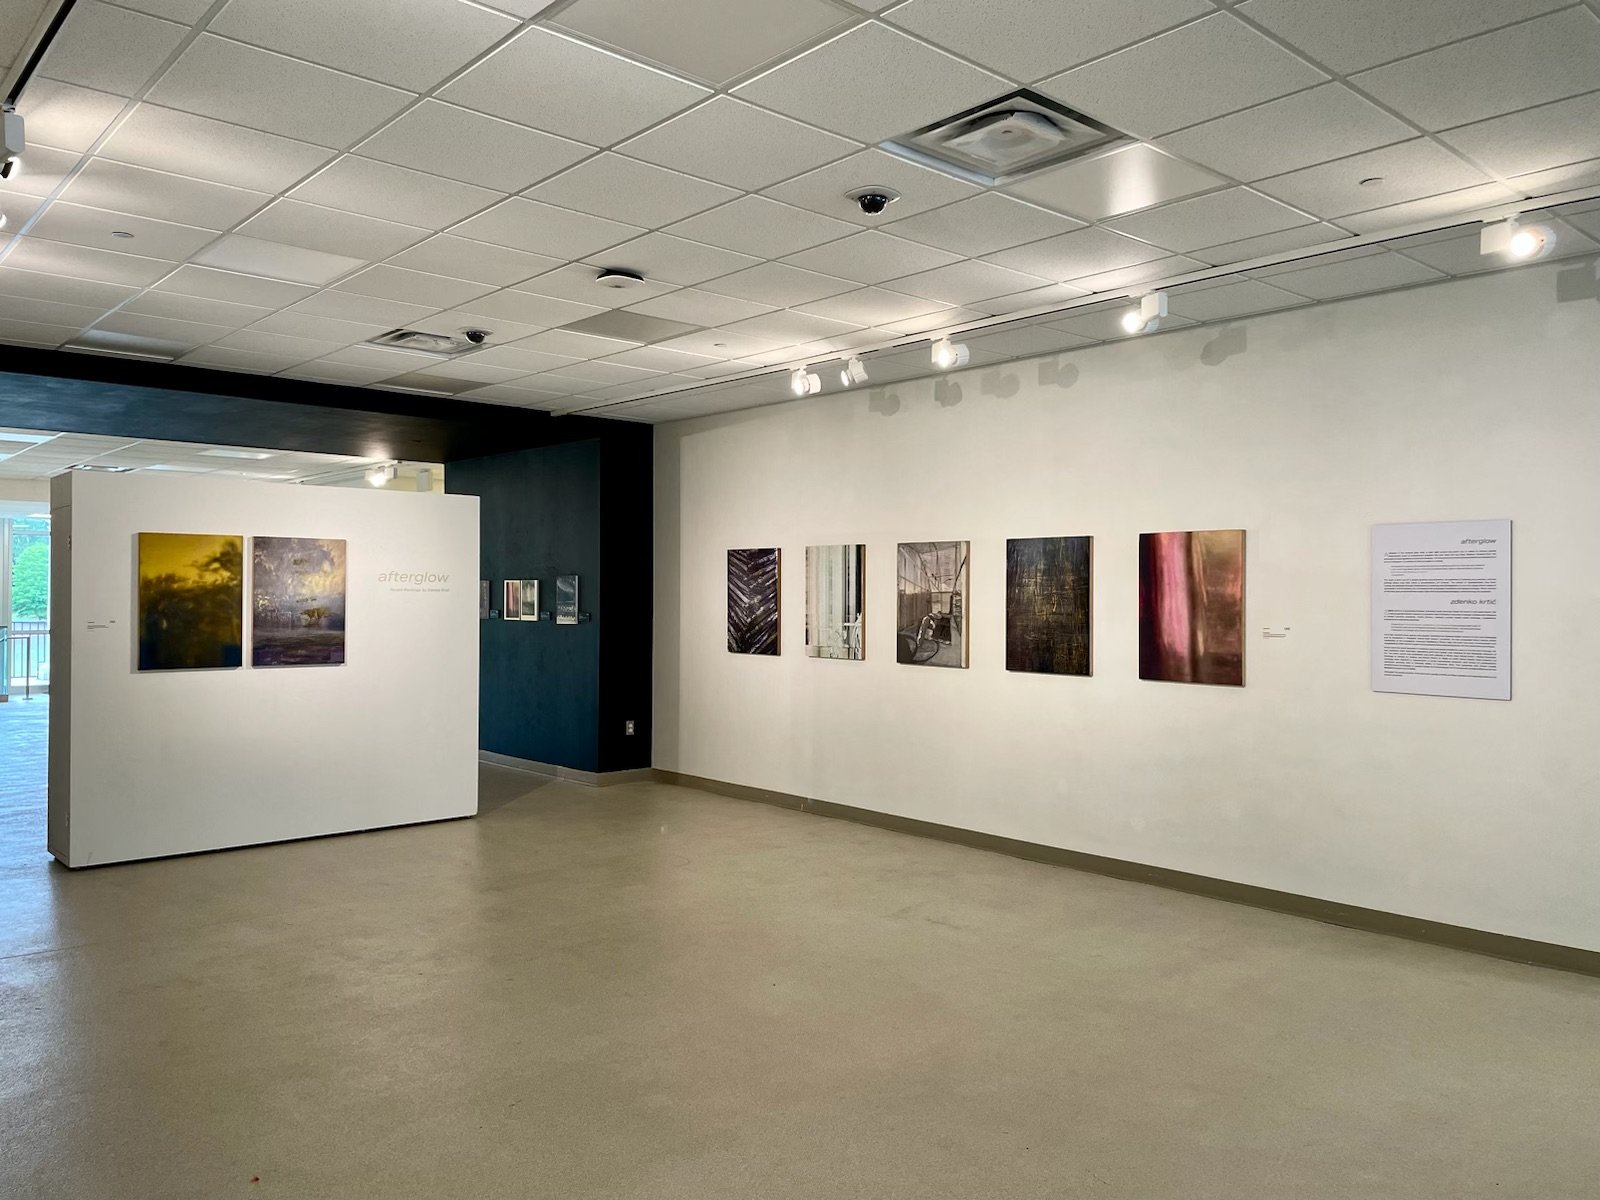 afterglow, installation view